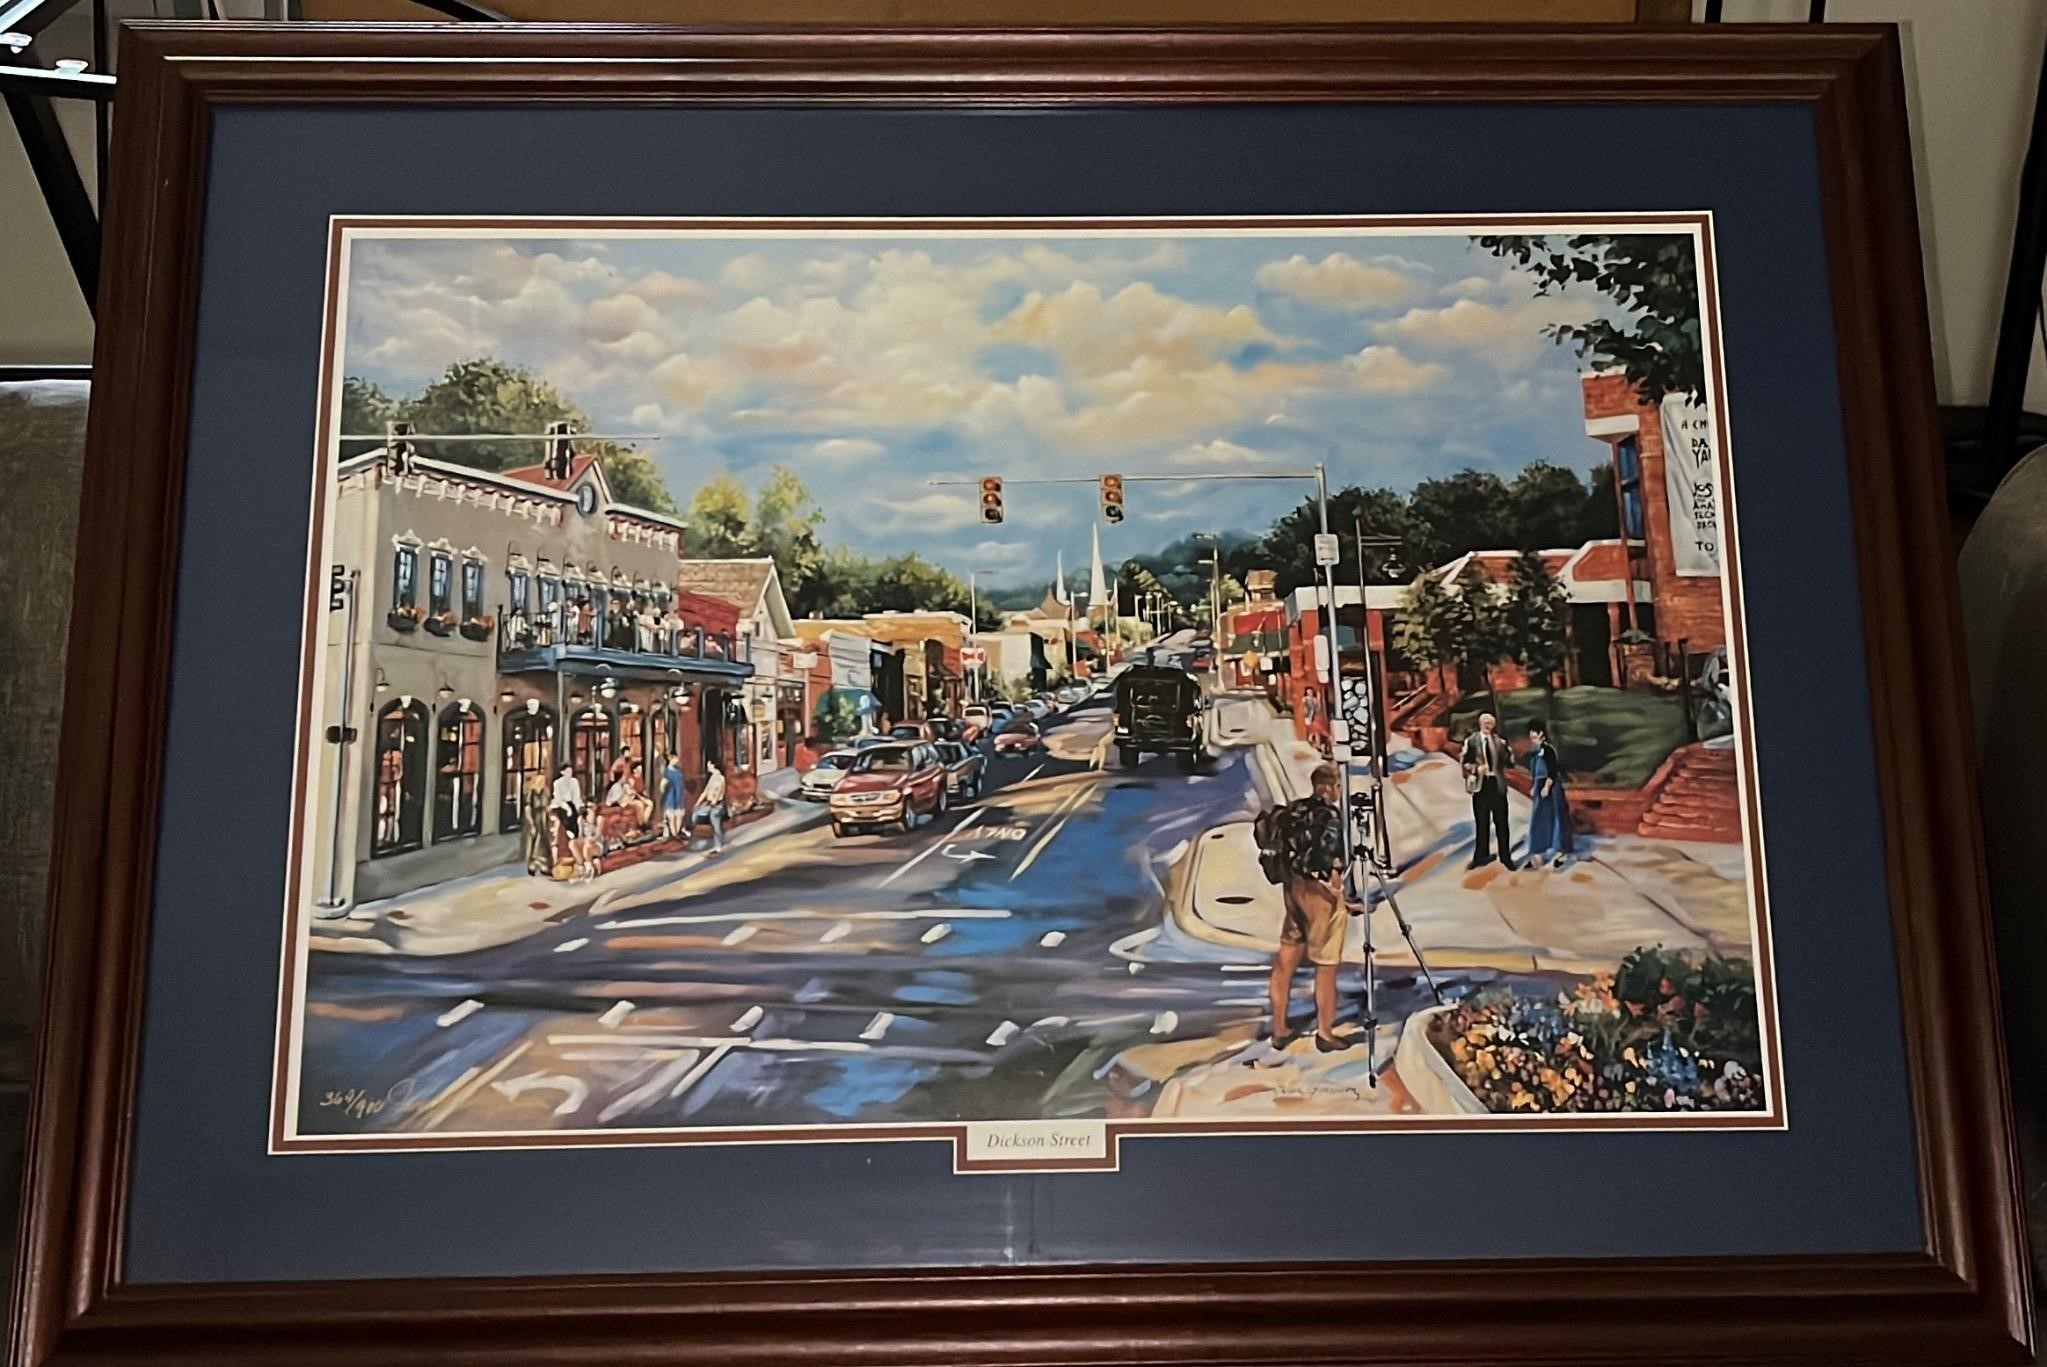 “DICKSON STREET” Signed/Dated  Picture